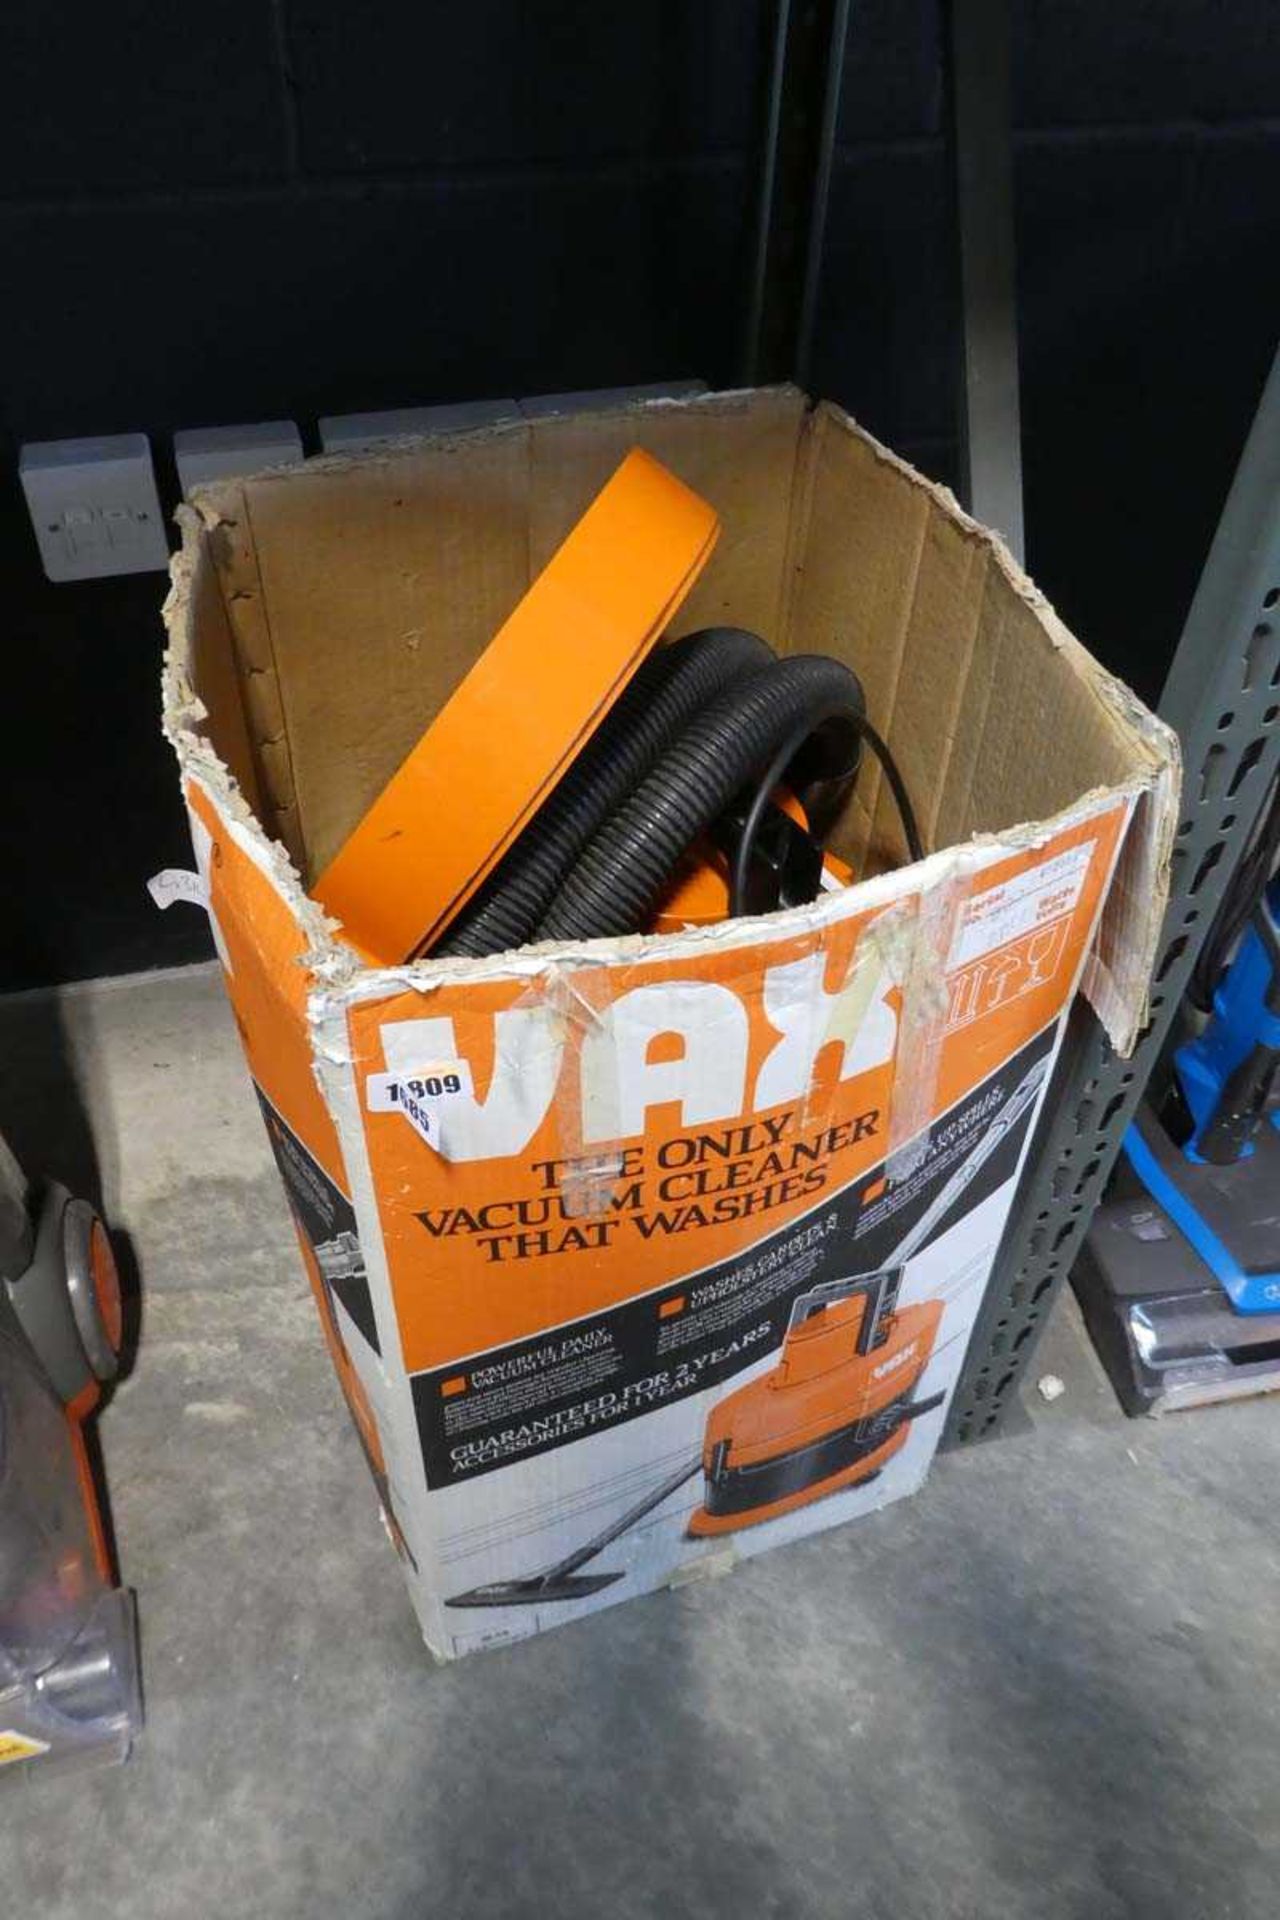 Vax wet and dry vacuum cleaner in box